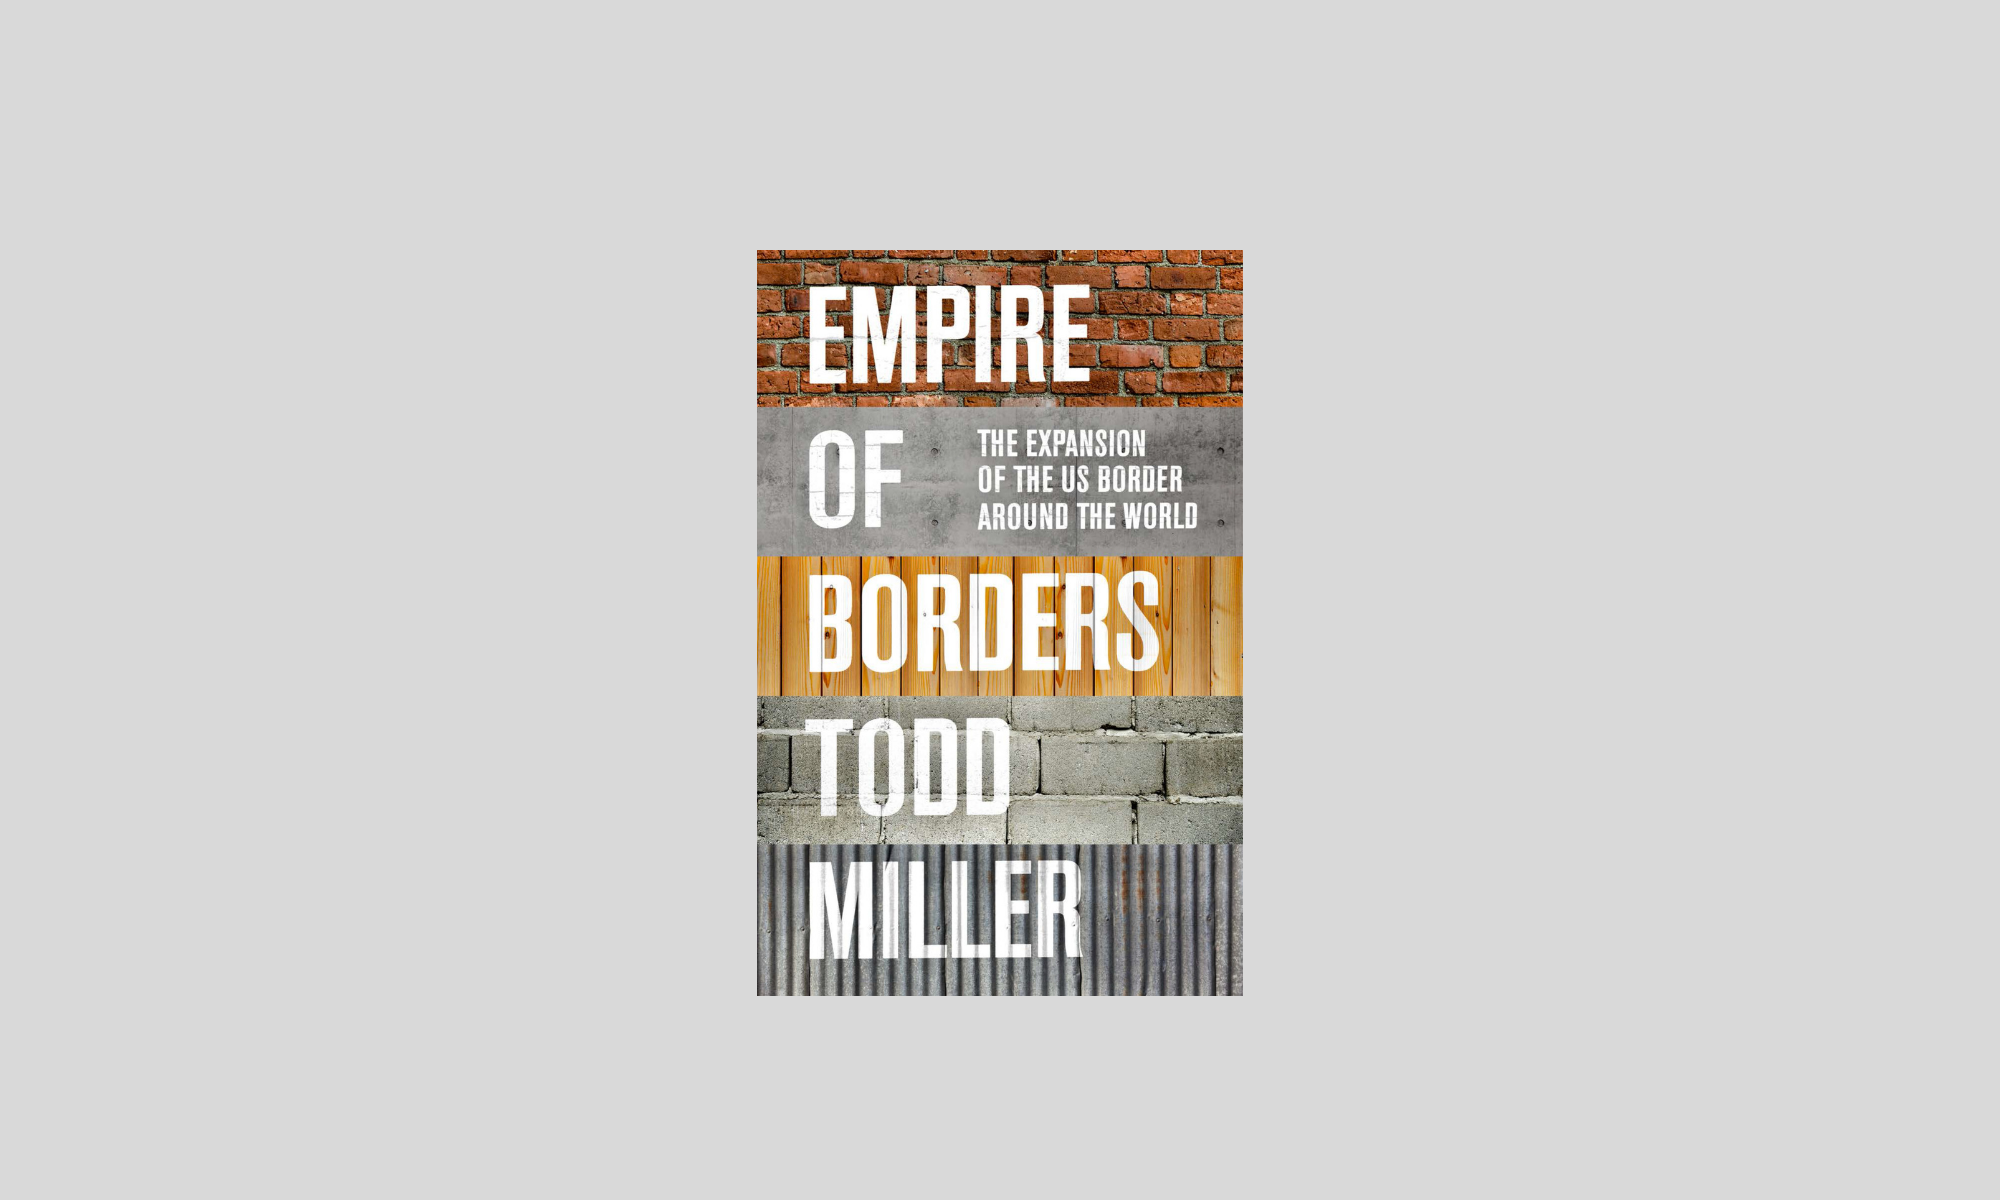 Empire of Borders by Todd Miller